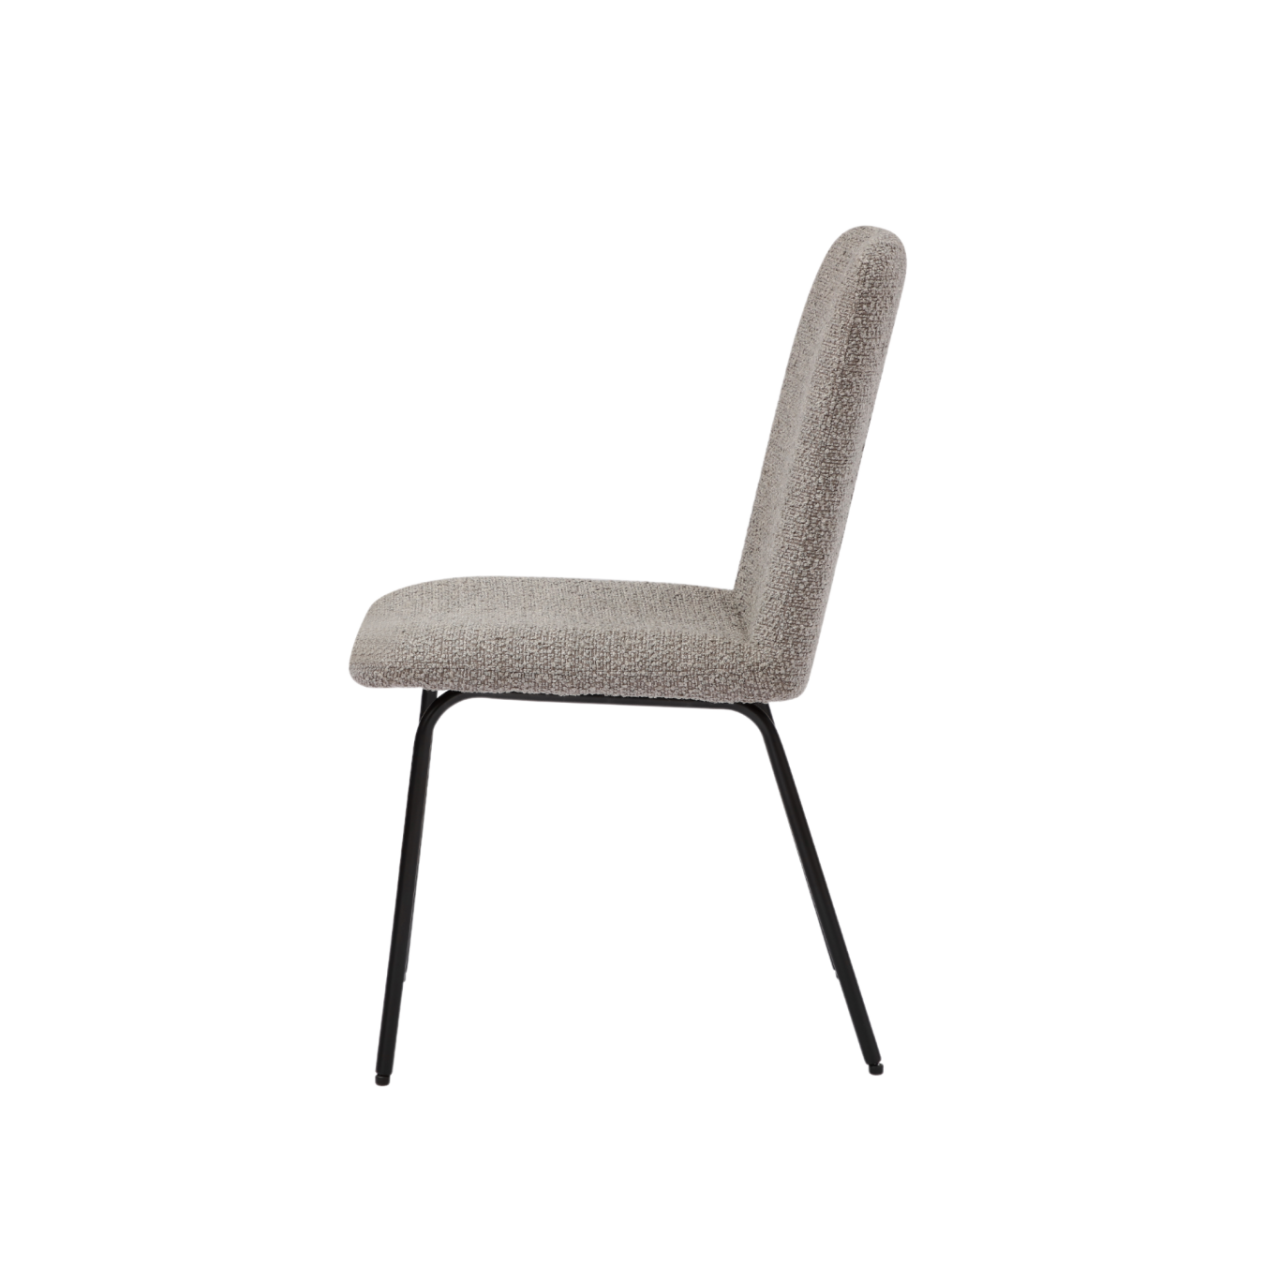 side view of comfortable, simple, modern dining chair upholstered in grey boucle fabric 